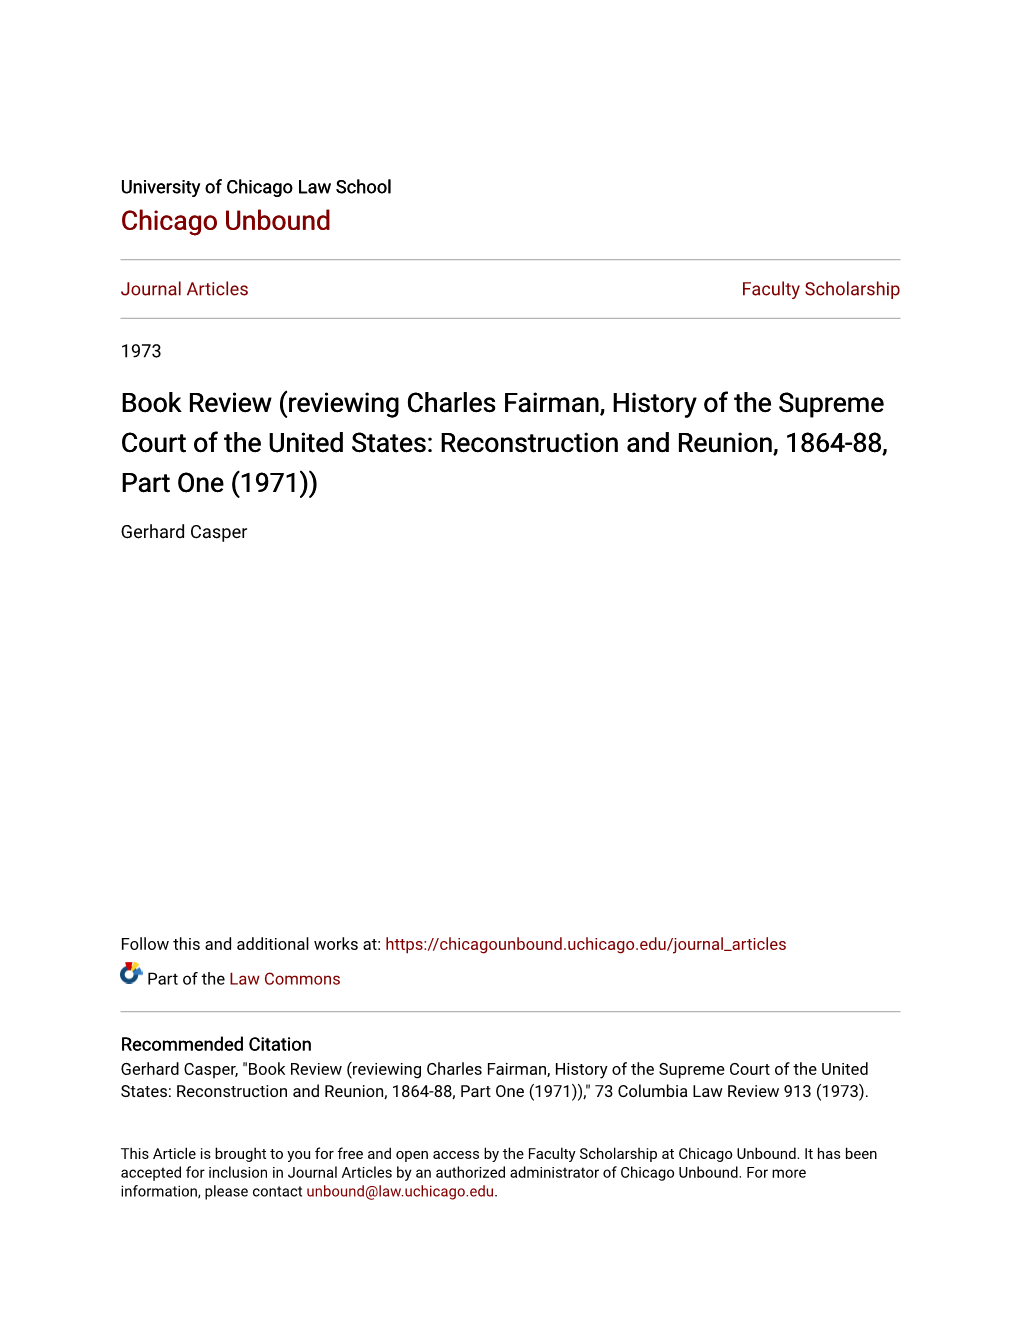 Reviewing Charles Fairman, History of the Supreme Court of the United States: Reconstruction and Reunion, 1864-88, Part One (1971))